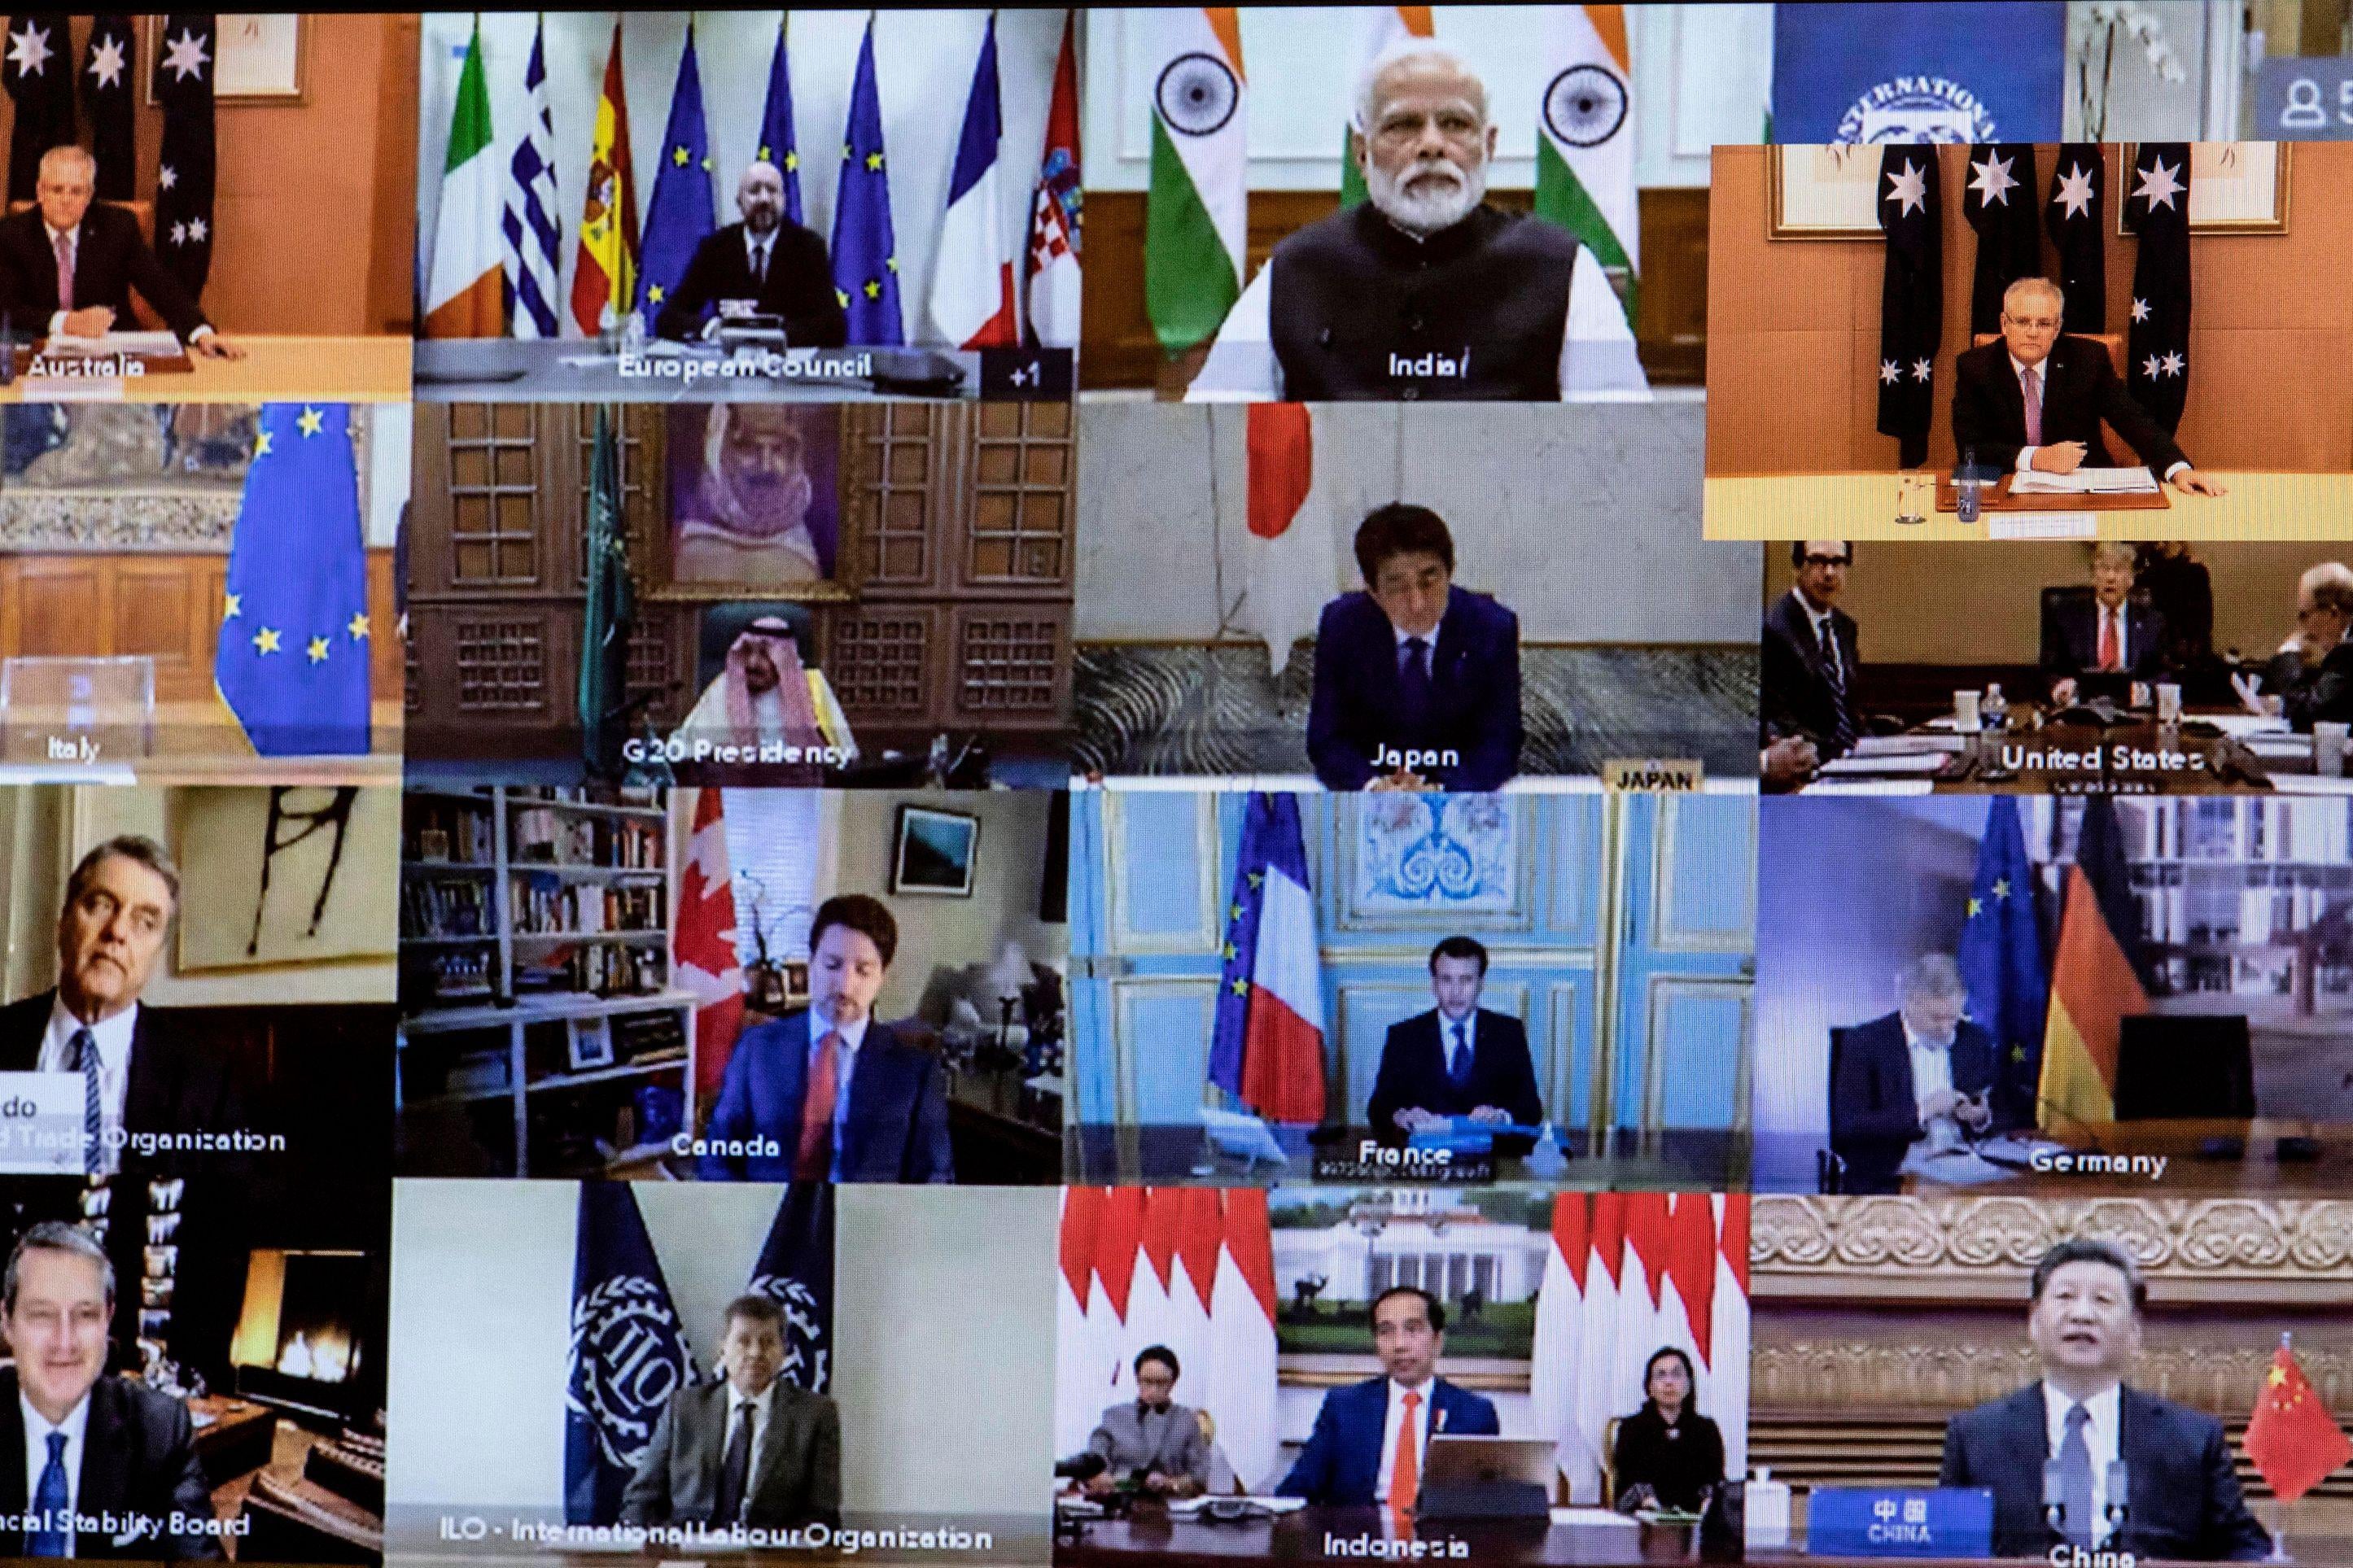 Video conference squares show world leaders in front of their countries' flags.